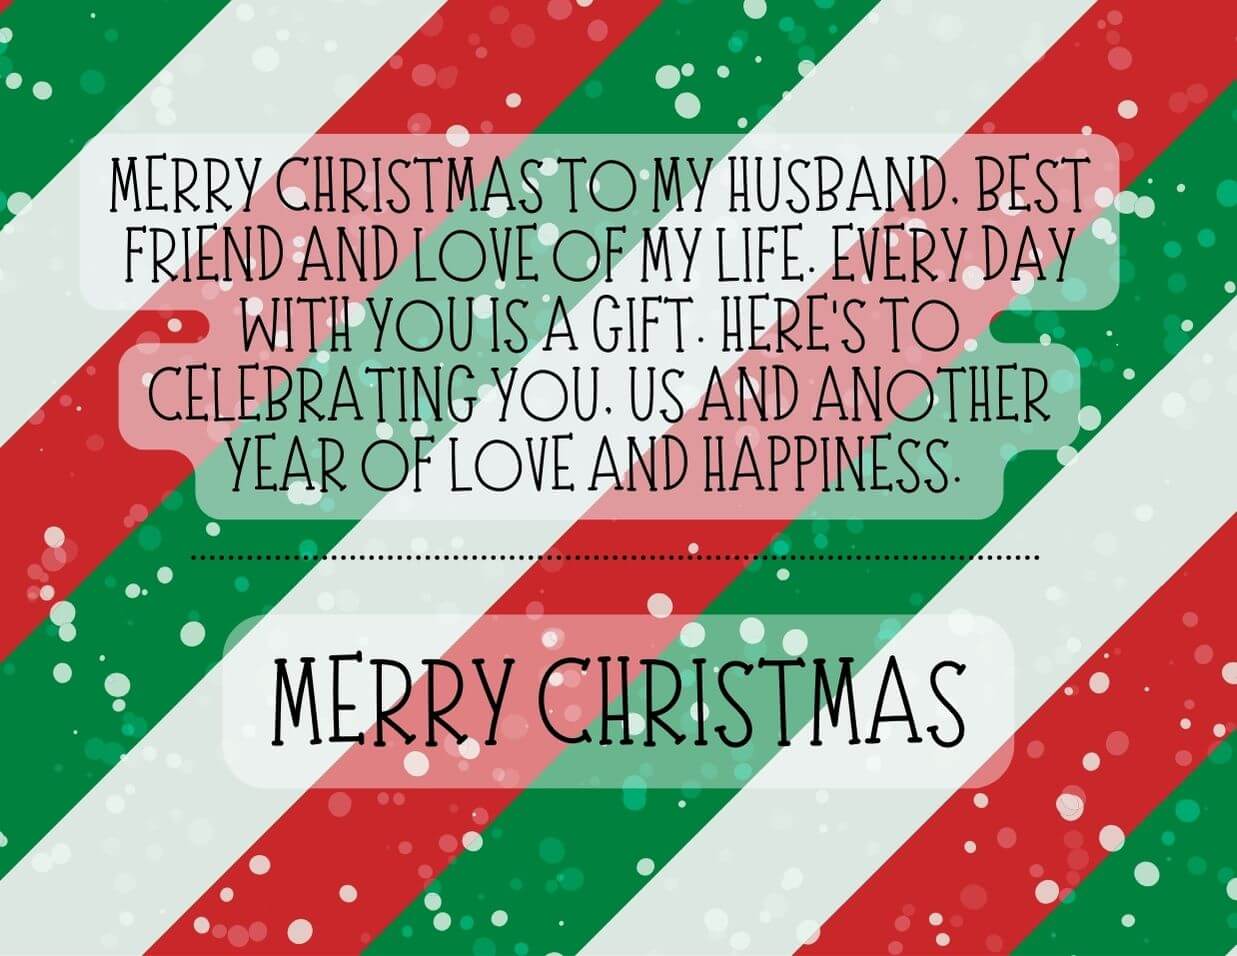 Merry Christmas Messages For Husband